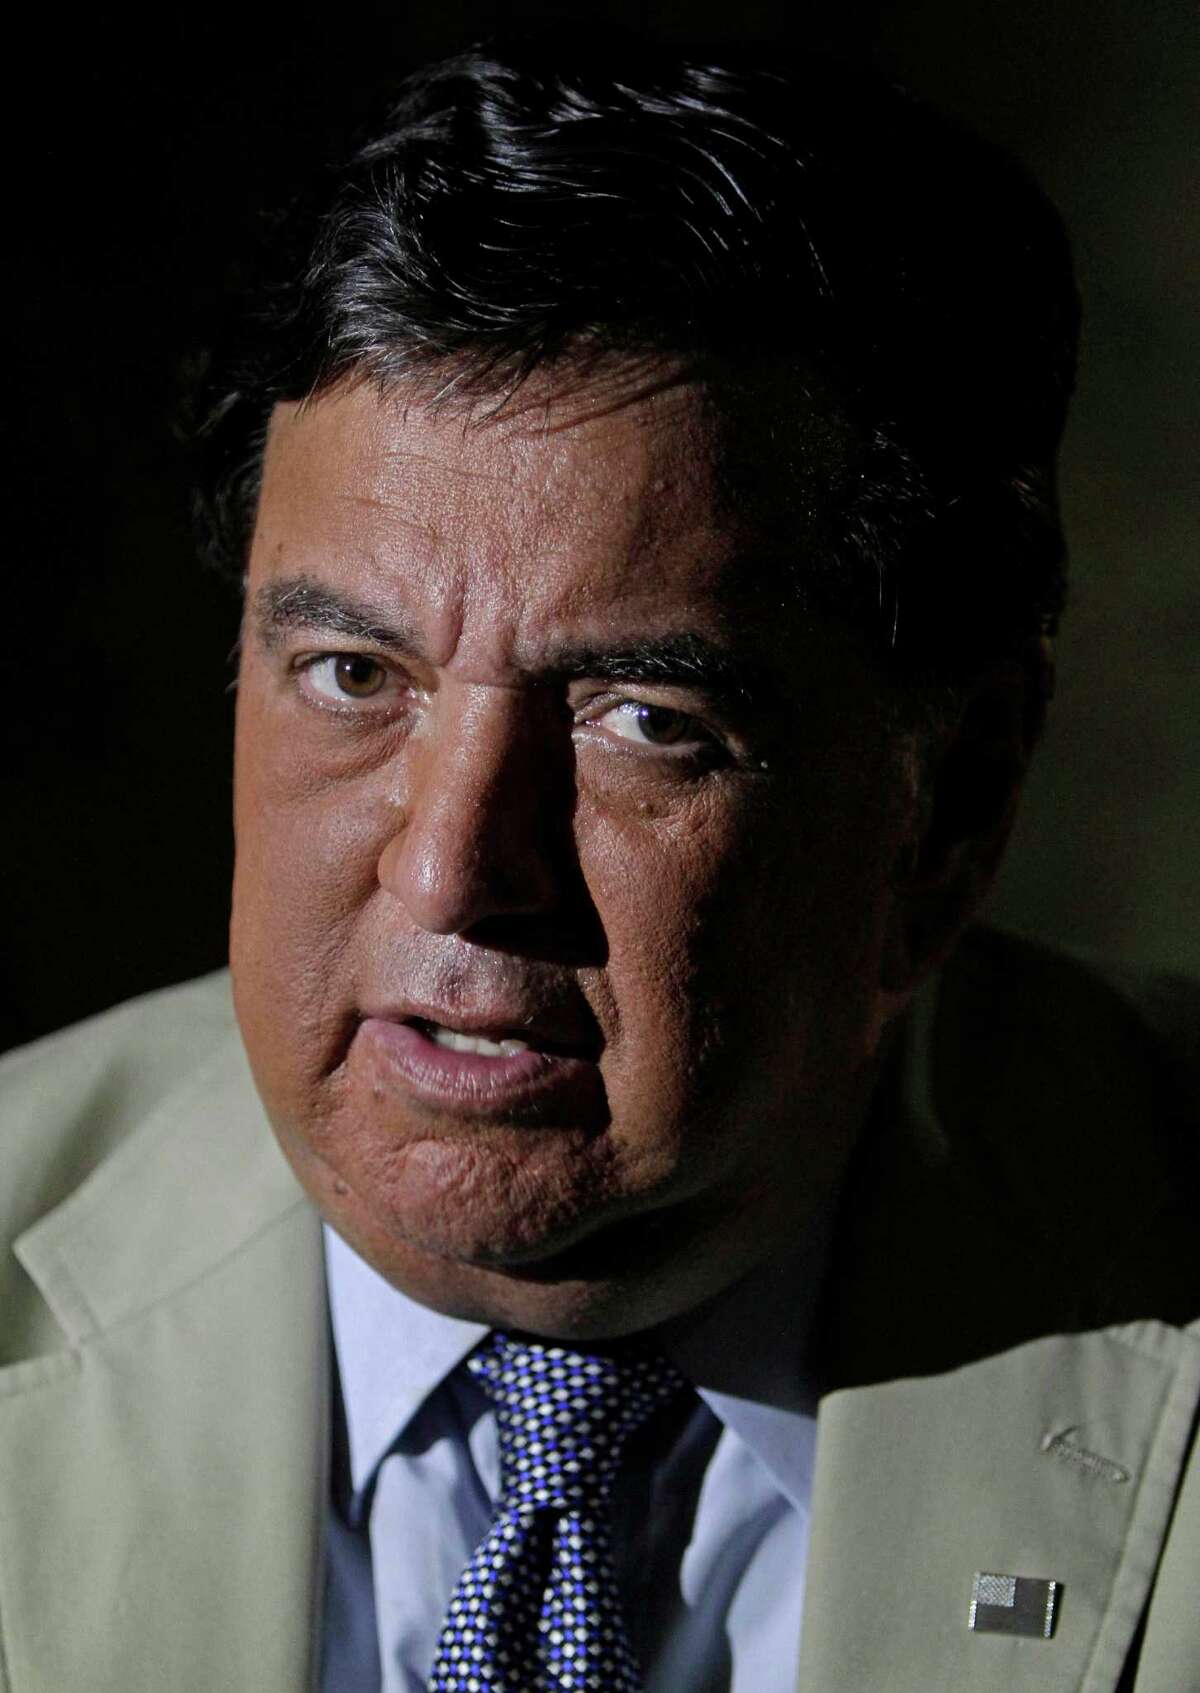 Former New Mexico Gov. Bill Richardson speaks during an interview with The Associated Press at the National hotel in Havana, Cuba,Thursday Sept. 8, 2011. Richardson said Thursday night that Cuban officials have denied his request to meet with jailed U.S. subcontractor Alan Gross, dashing hopes that the American might be freed soon. (AP Photo/Franklin Reyes)